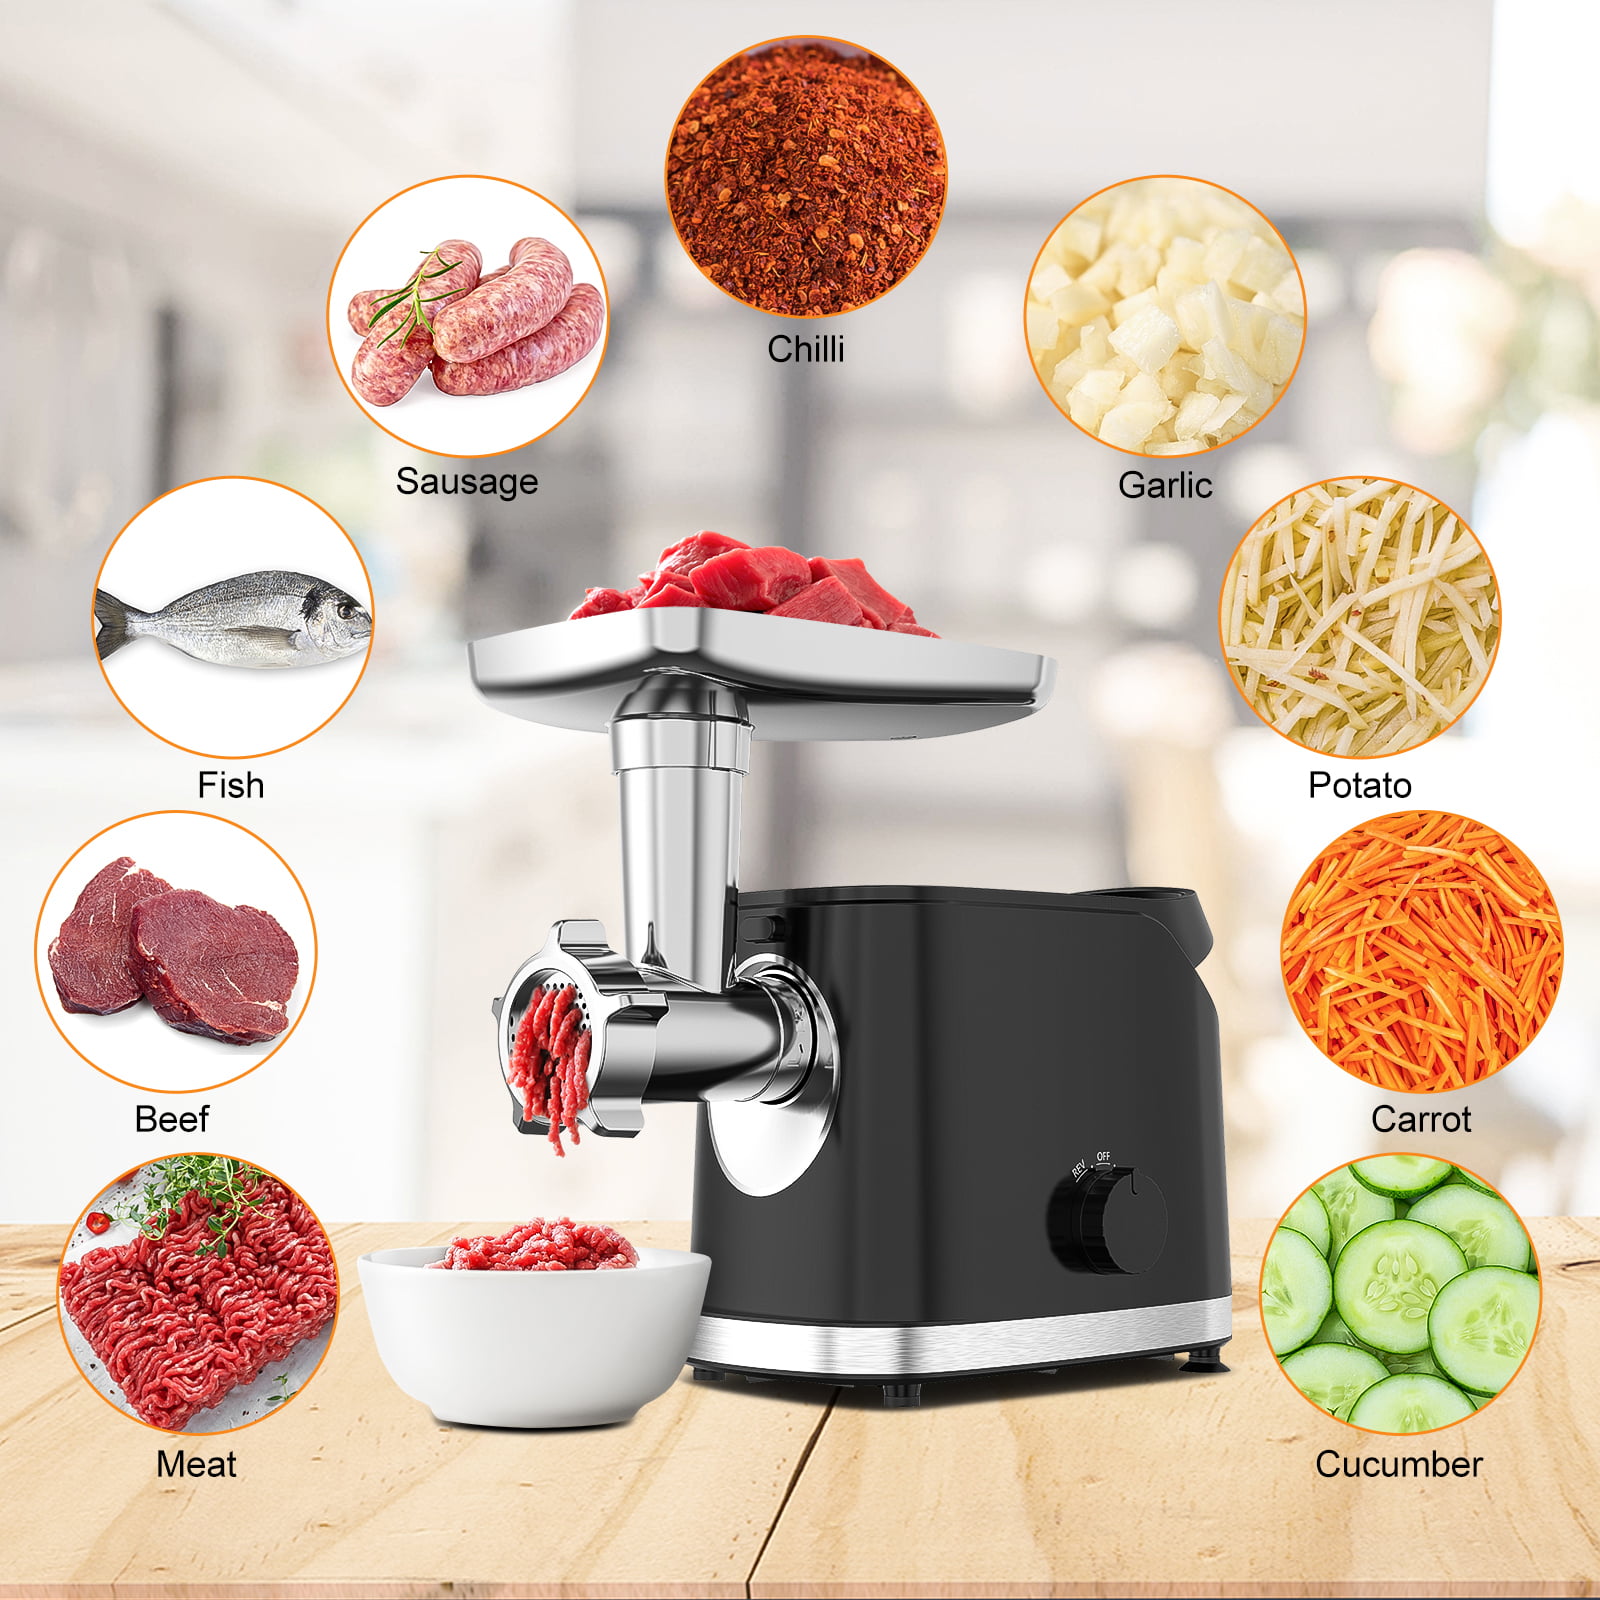 Electric Meat Grinder,5-IN-1 Meat Mincer, 3-Speed, 10 Pounds/Min